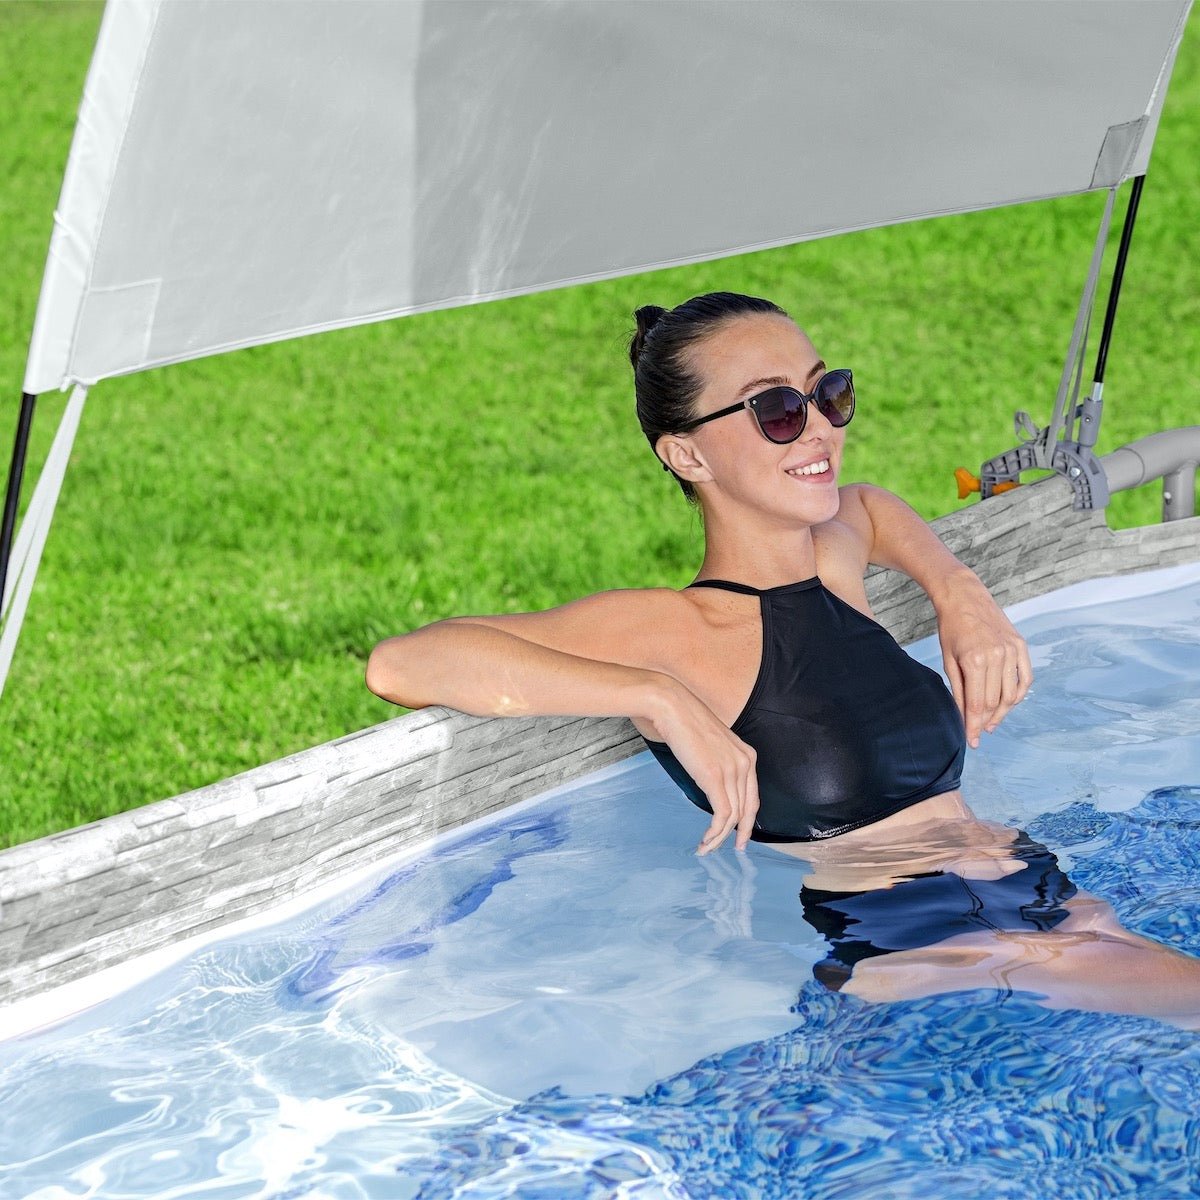 Bestway Above Ground Pool Sun Canopy for Oval and Rectangle Pools